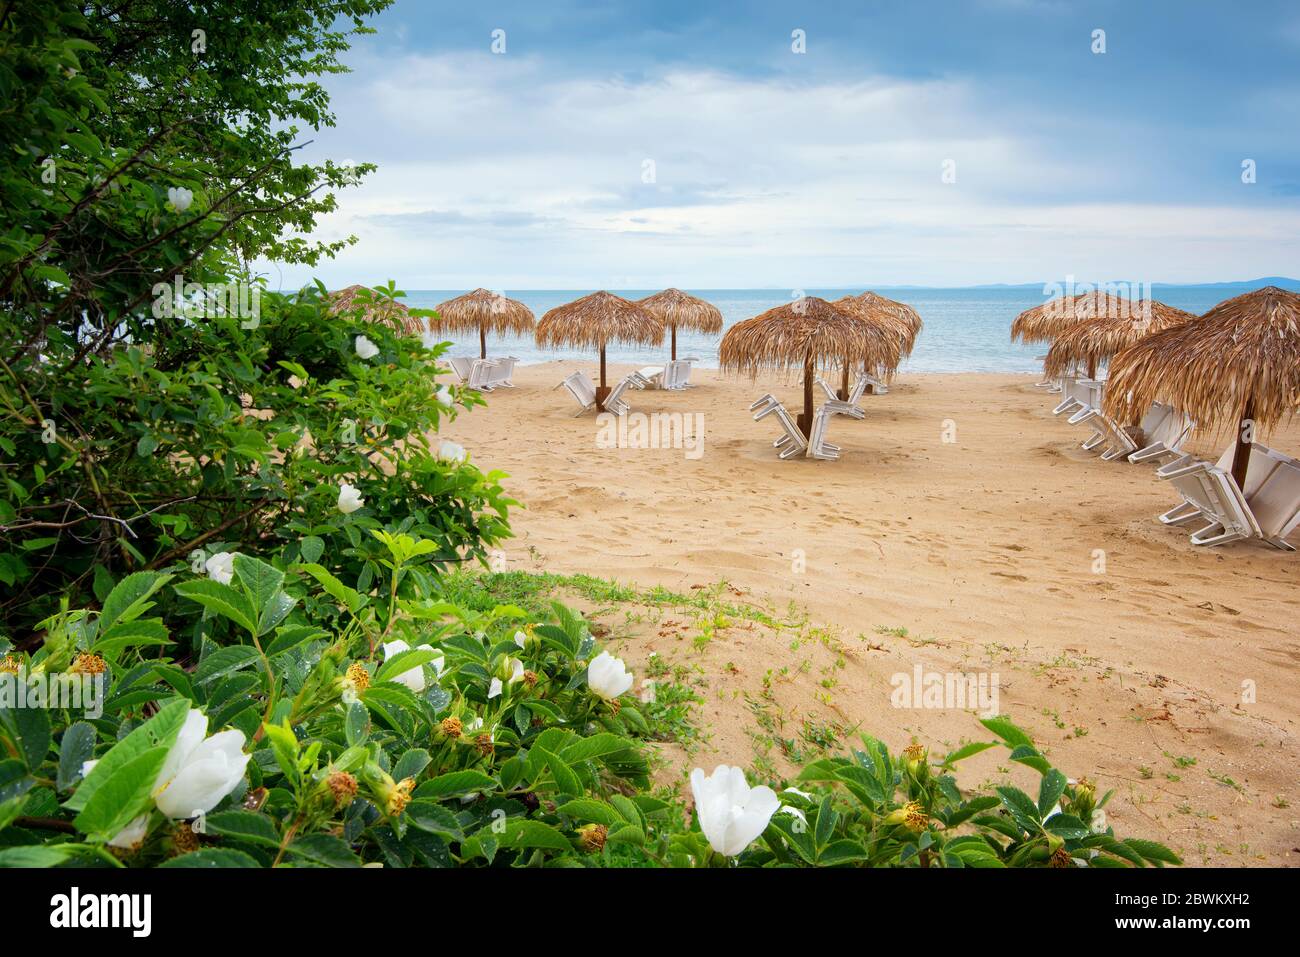 Summer vacation destination. Straw umbrellas and sunbeds on the empty pebble beach with sea in the background. Vacation And Tourism Concept. Sunbeds O Stock Photo